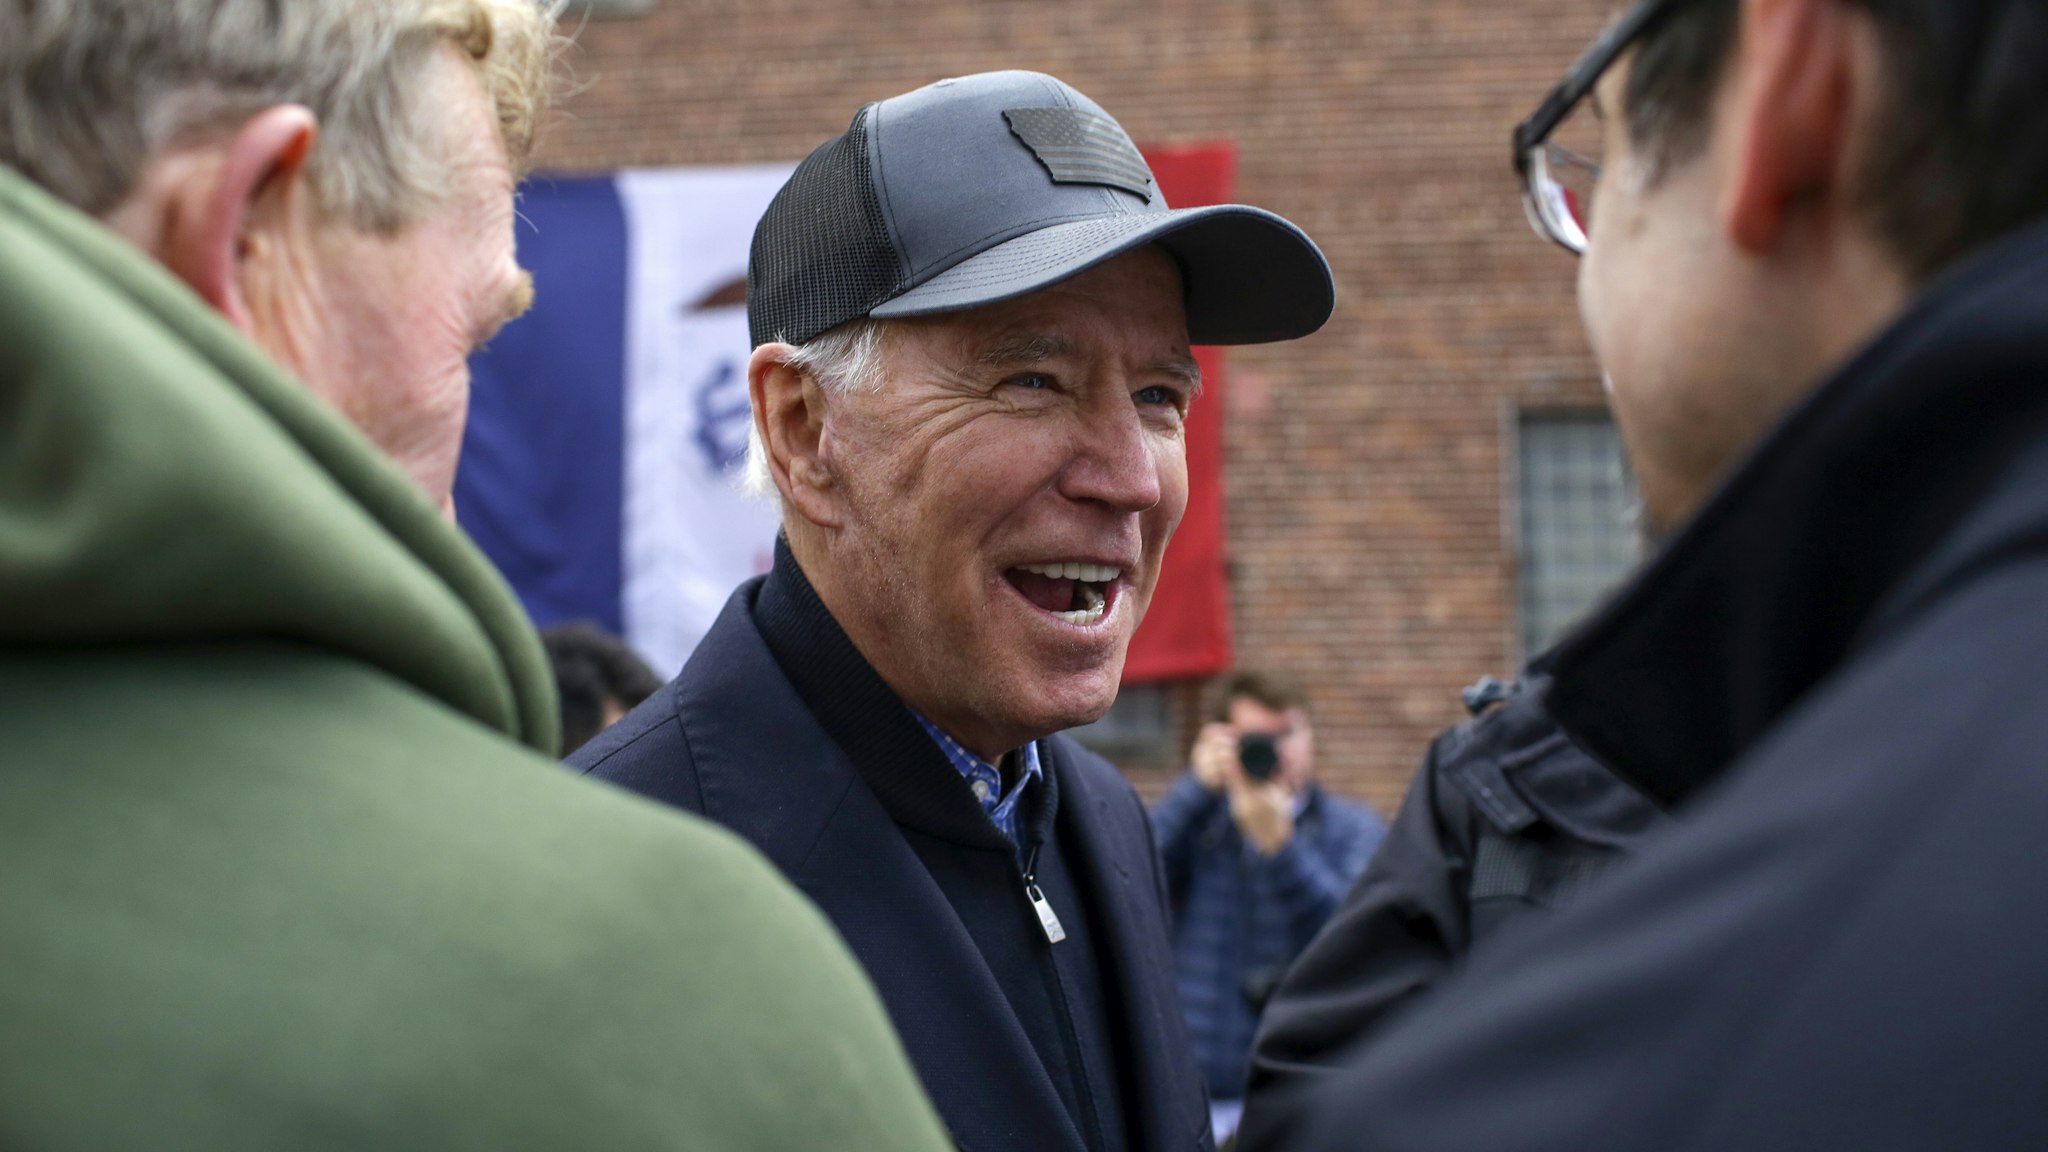 COUNCIL BLUFFS, IA - NOVEMBER 30: Democratic presidential candidate, former Vice President Joe Biden greets attendees during a campaign event on November 30, 2019 in Council Bluffs, Iowa. Biden, who begins his eight-day bus tour across Iowa on Saturday, once lead the state in the polls but now trails presidential candidates Pete Buttigieg and Elizabeth Warren with just under 3 months until the 2020 Iowa Democratic caucuses. (Photo by Joshua Lott/Getty Images)